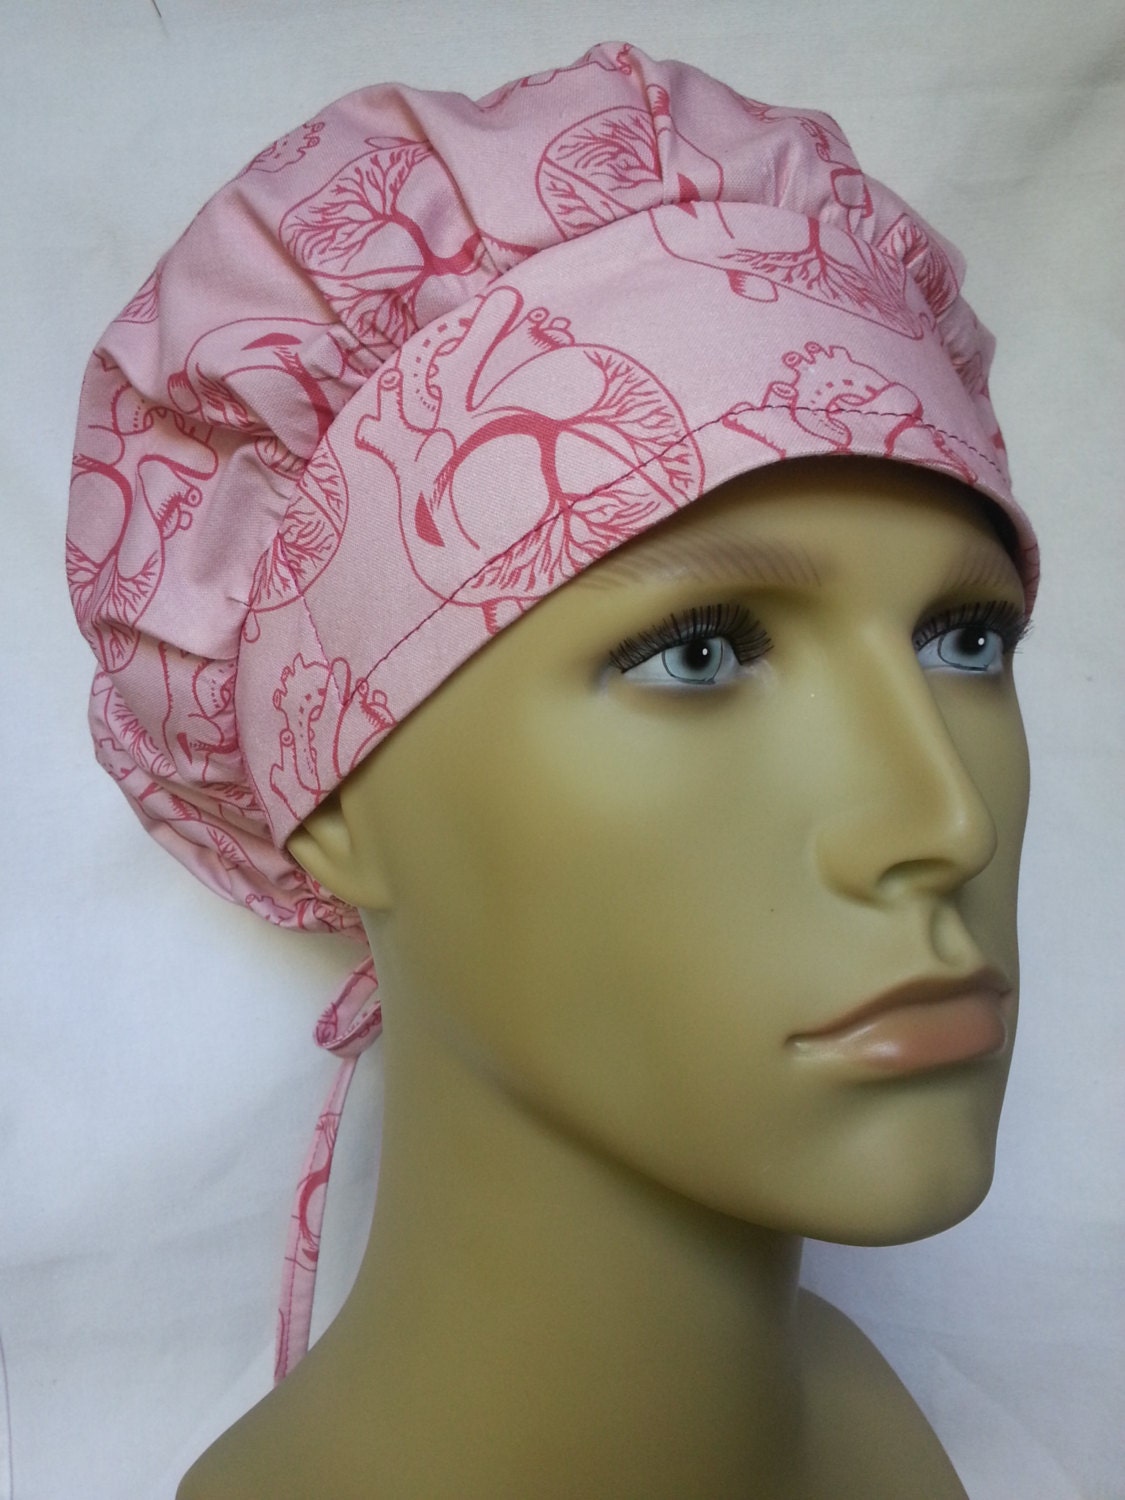 HEART surgical scrub hat theatre cap CARDIAC anatomic banded | Etsy